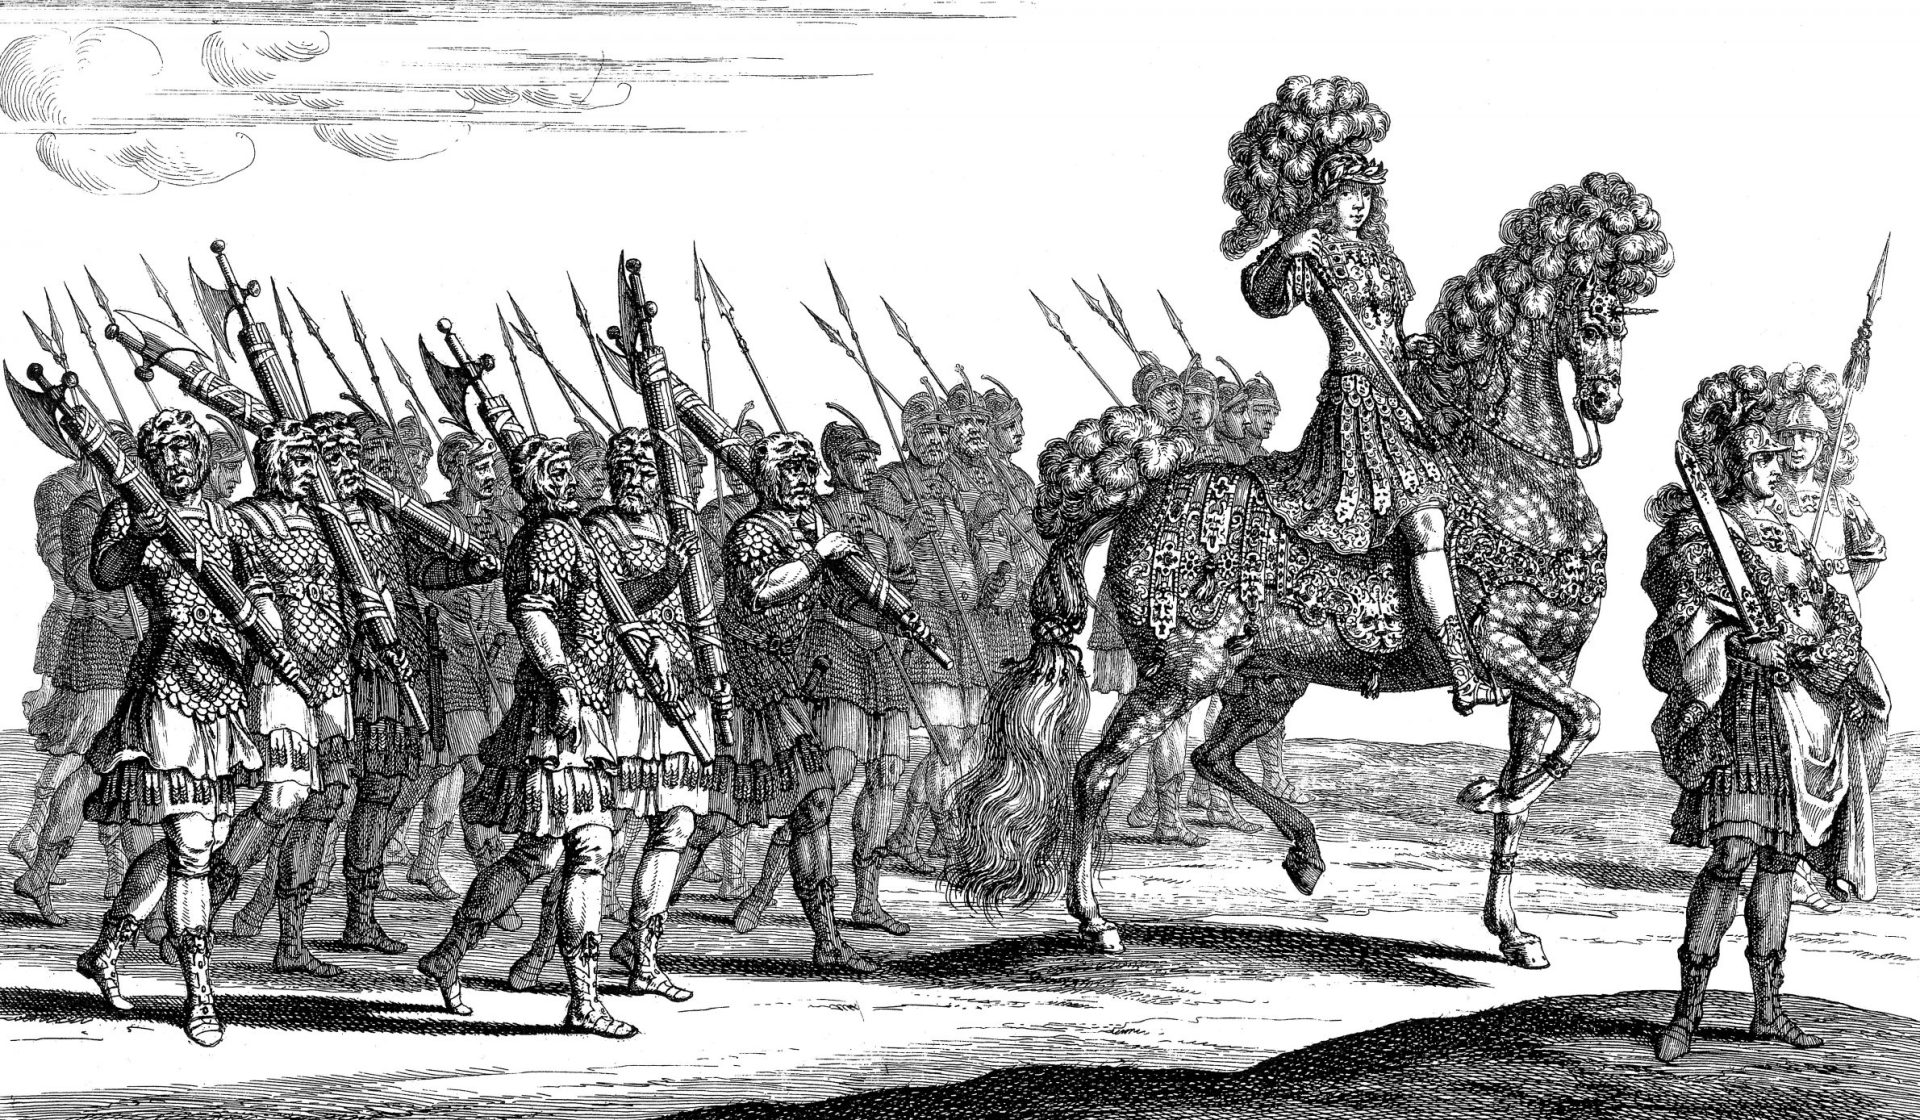 Engraving of a group of people, one on horseback.